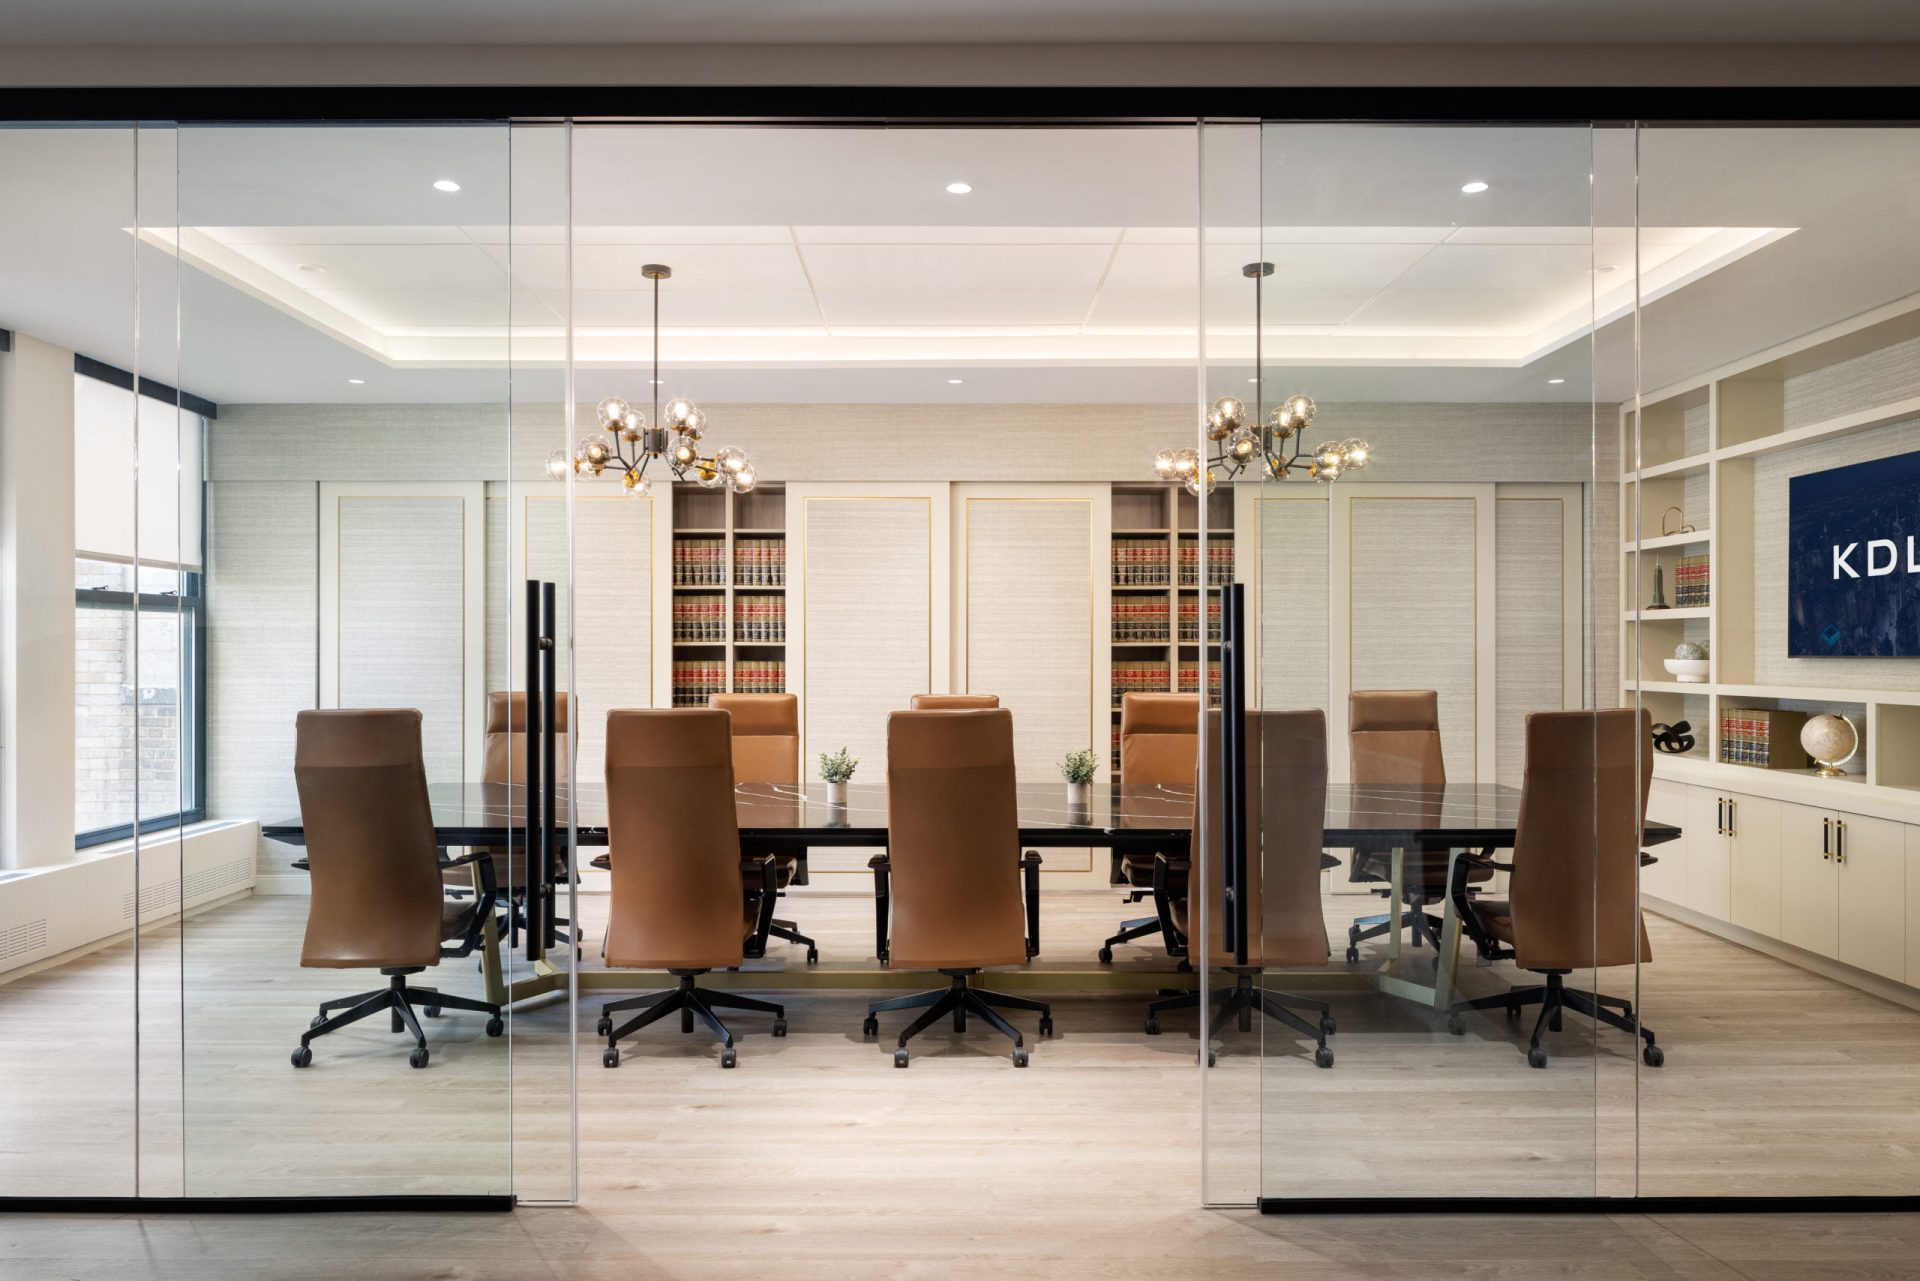 Update boardroom with top-of-the-line furniture